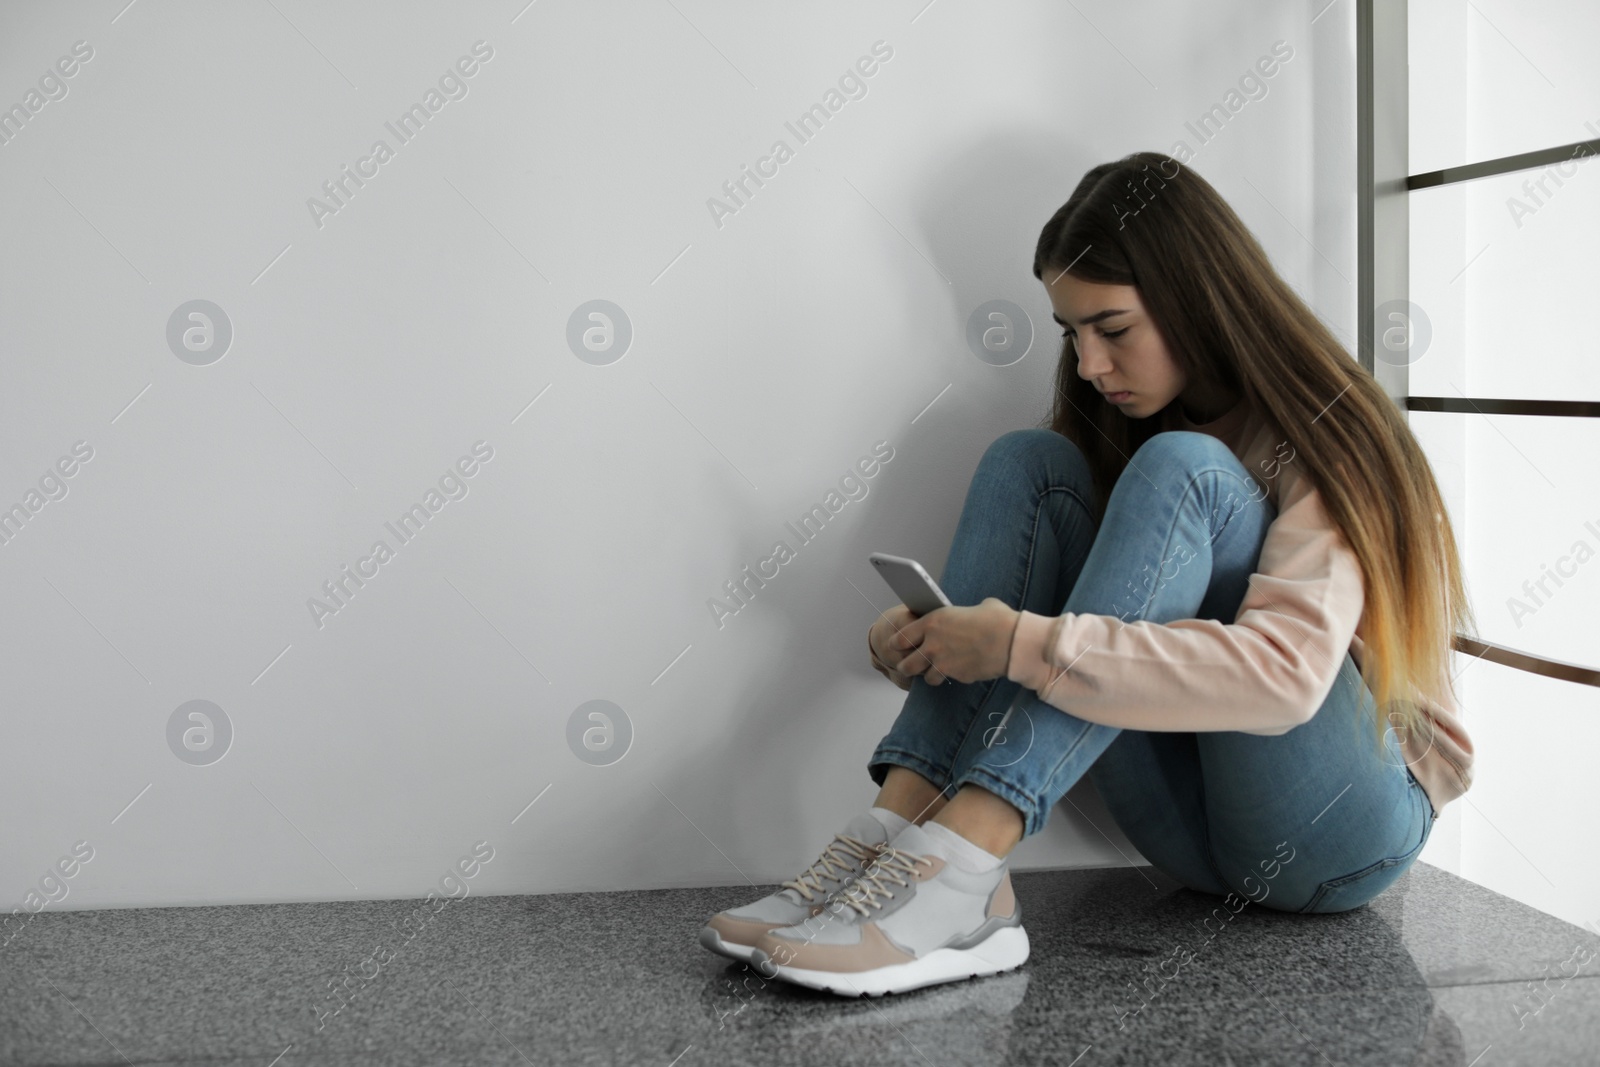 Photo of Upset teenage girl with smartphone sitting on floor near wall. Space for text